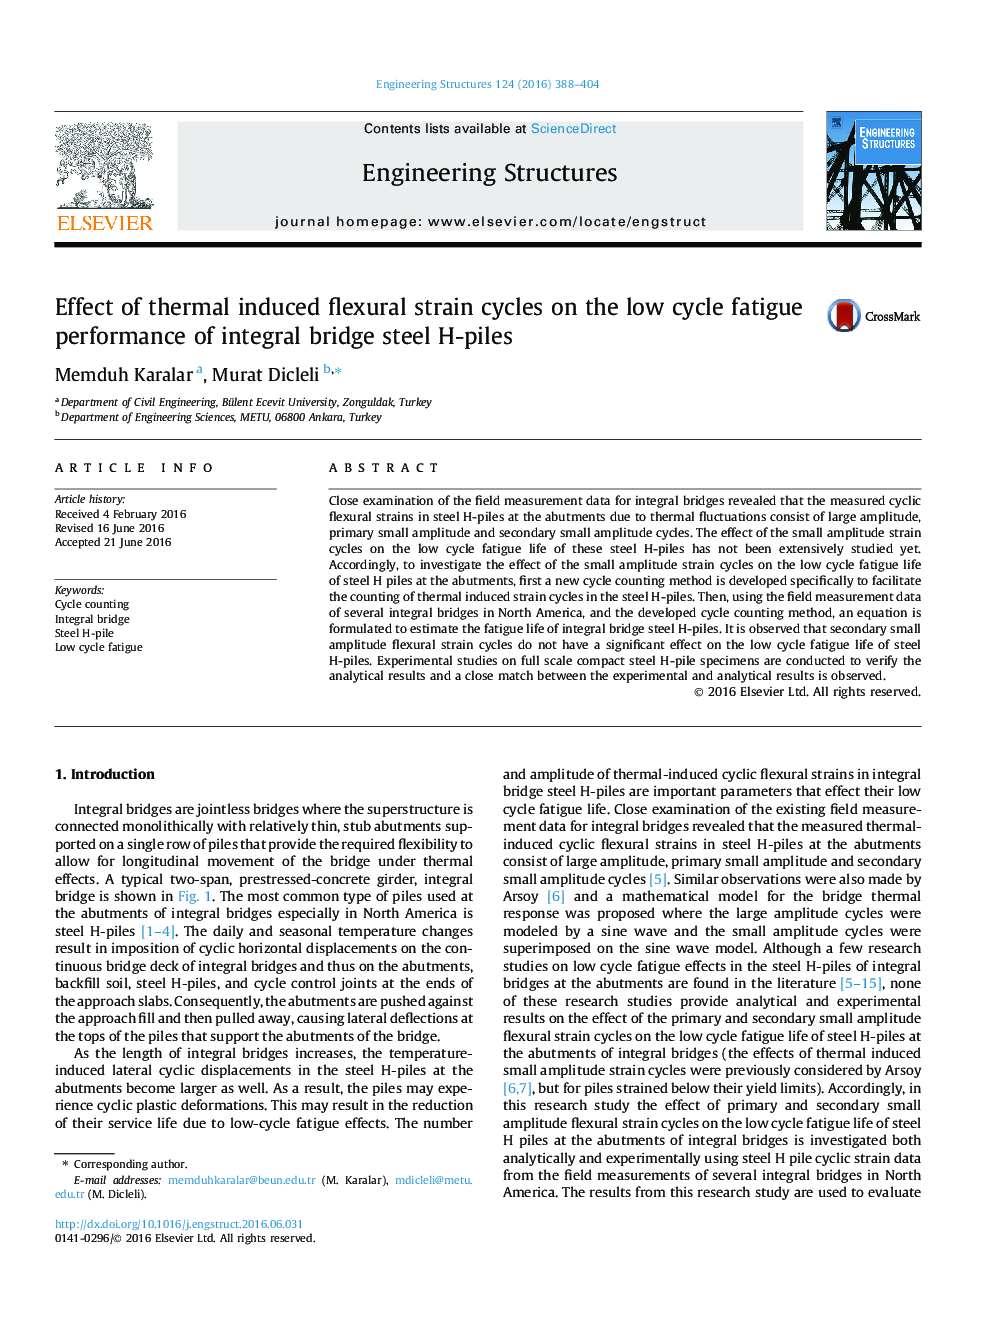 Effect of thermal induced flexural strain cycles on the low cycle fatigue performance of integral bridge steel H-piles